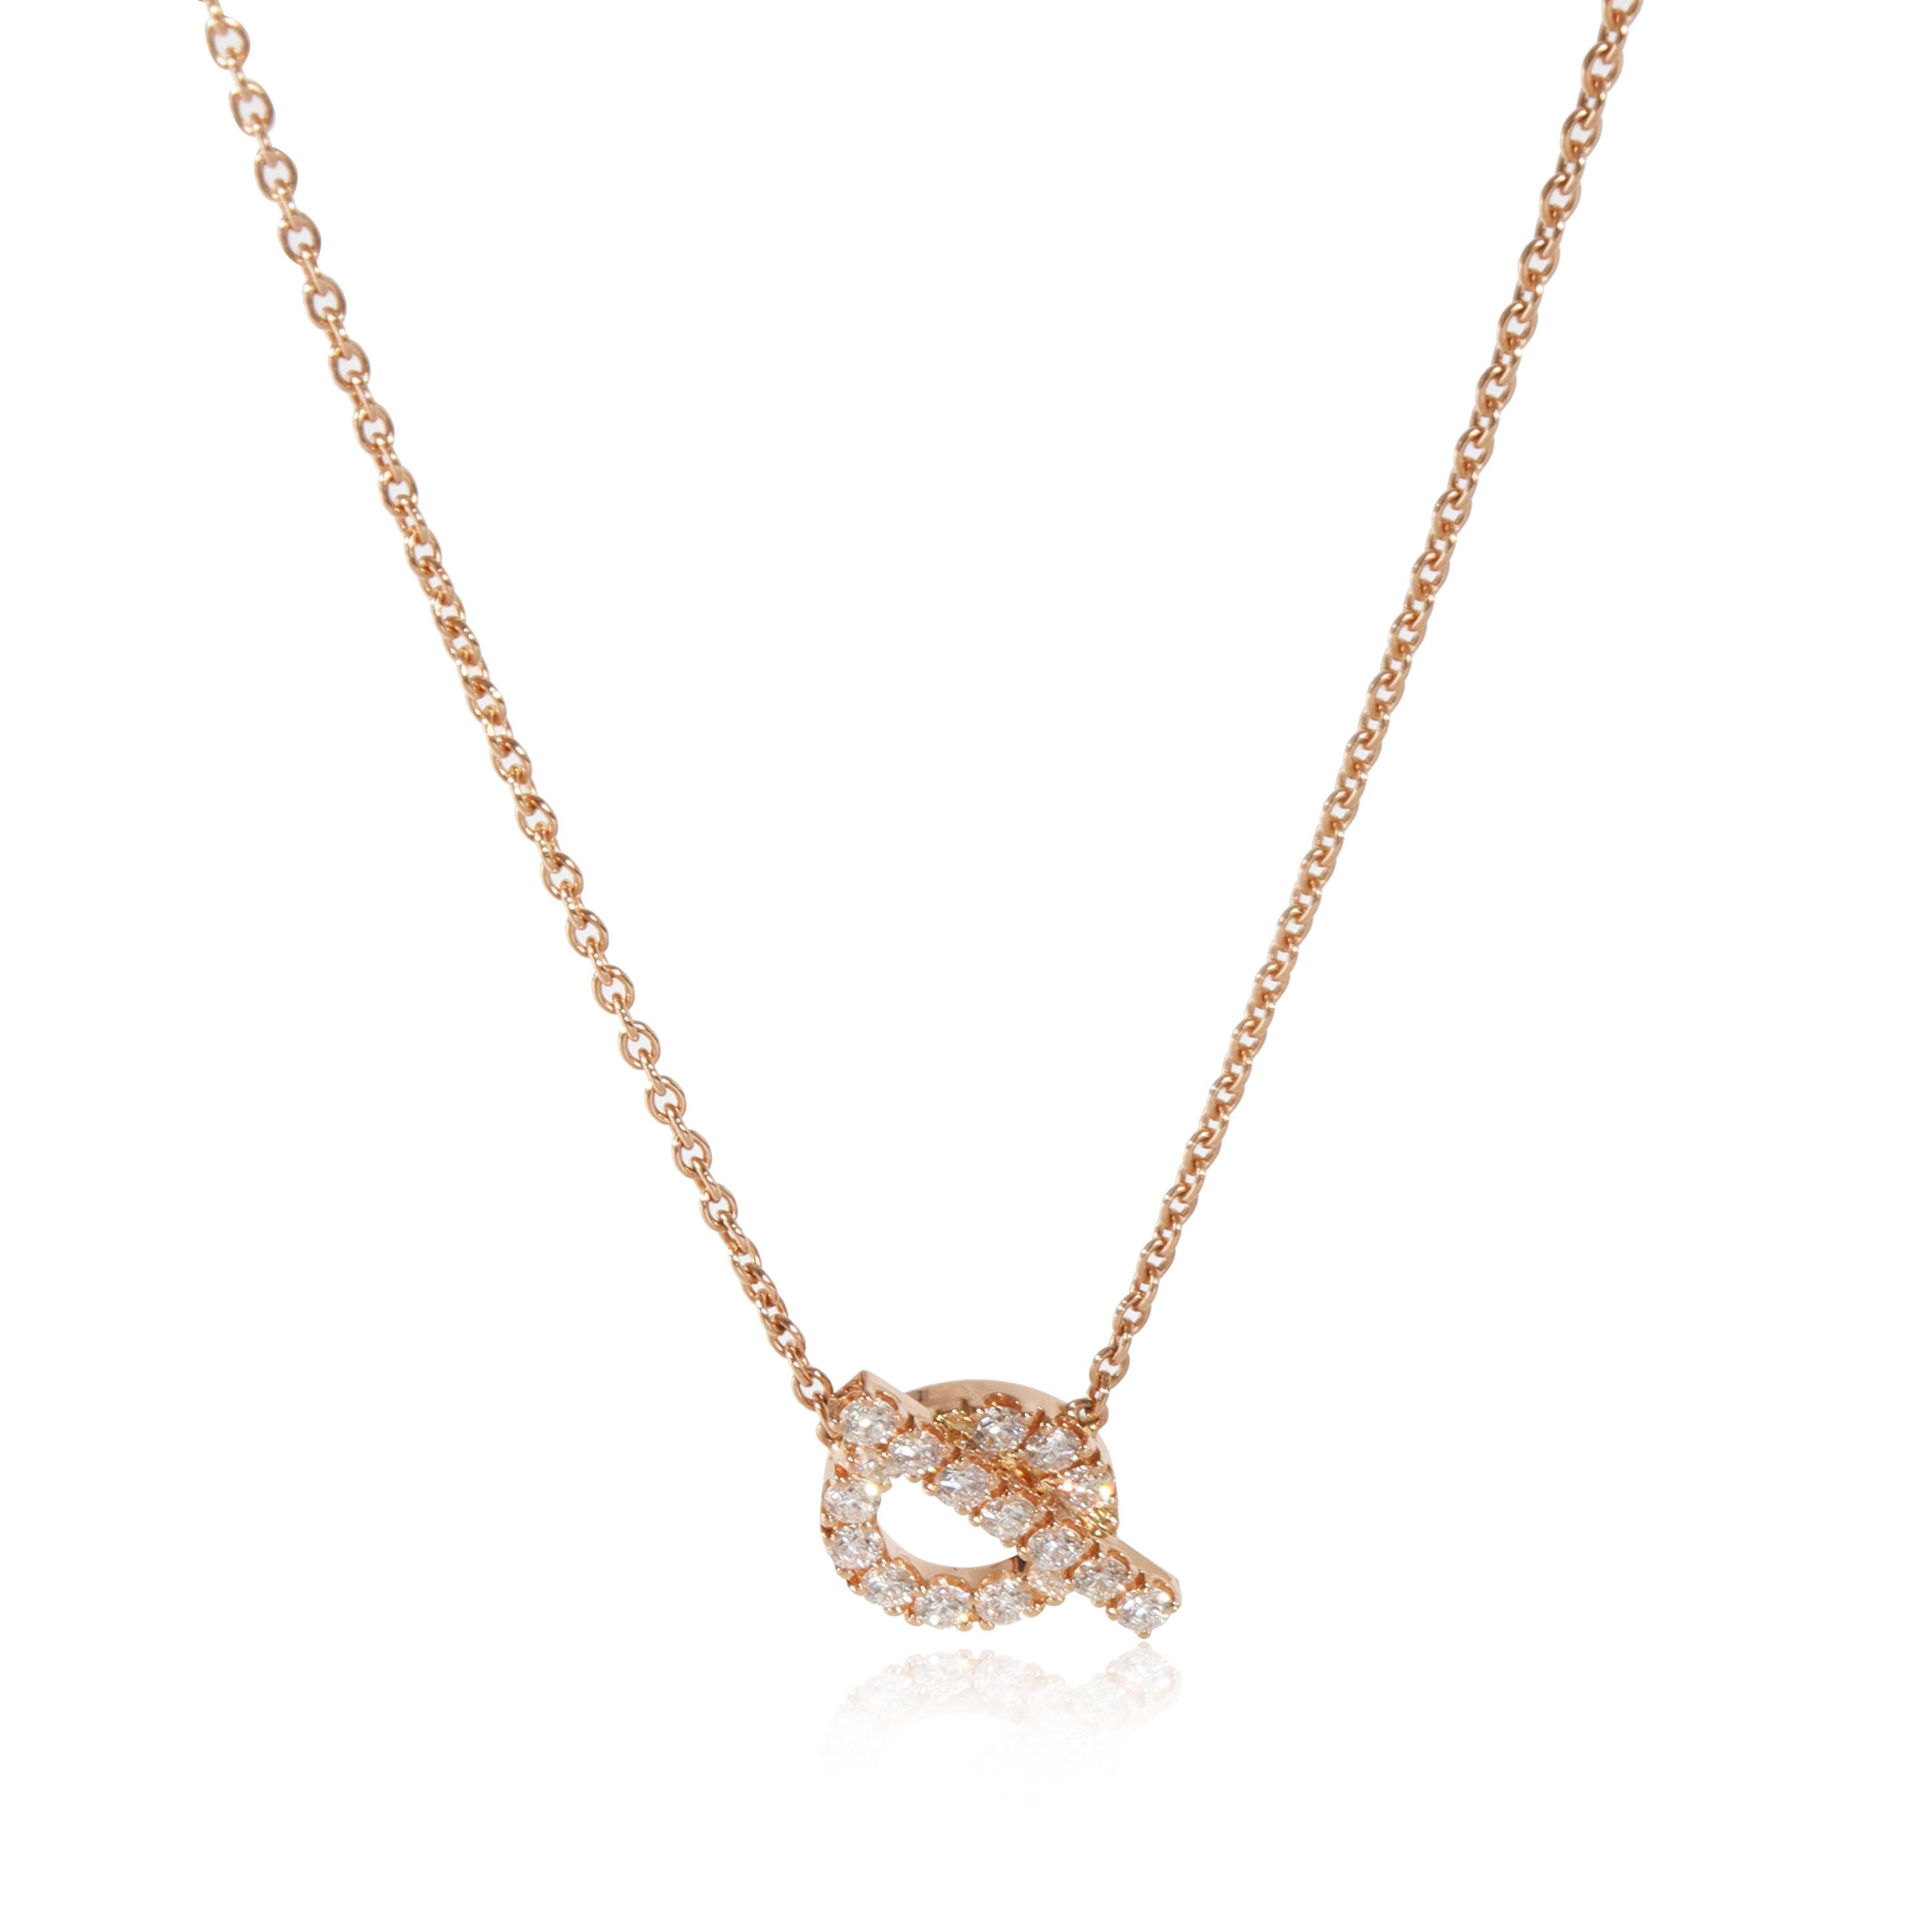 Hermès Finesse Pendant with Diamonds in 18k Rose Gold 0.46 CTW

PRIMARY DETAILS
SKU: 125745
Listing Title: Hermès Finesse Pendant with Diamonds in 18k Rose Gold 0.46 CTW
Condition Description: Retails for 5400 USD. In excellent condition. 16 inches